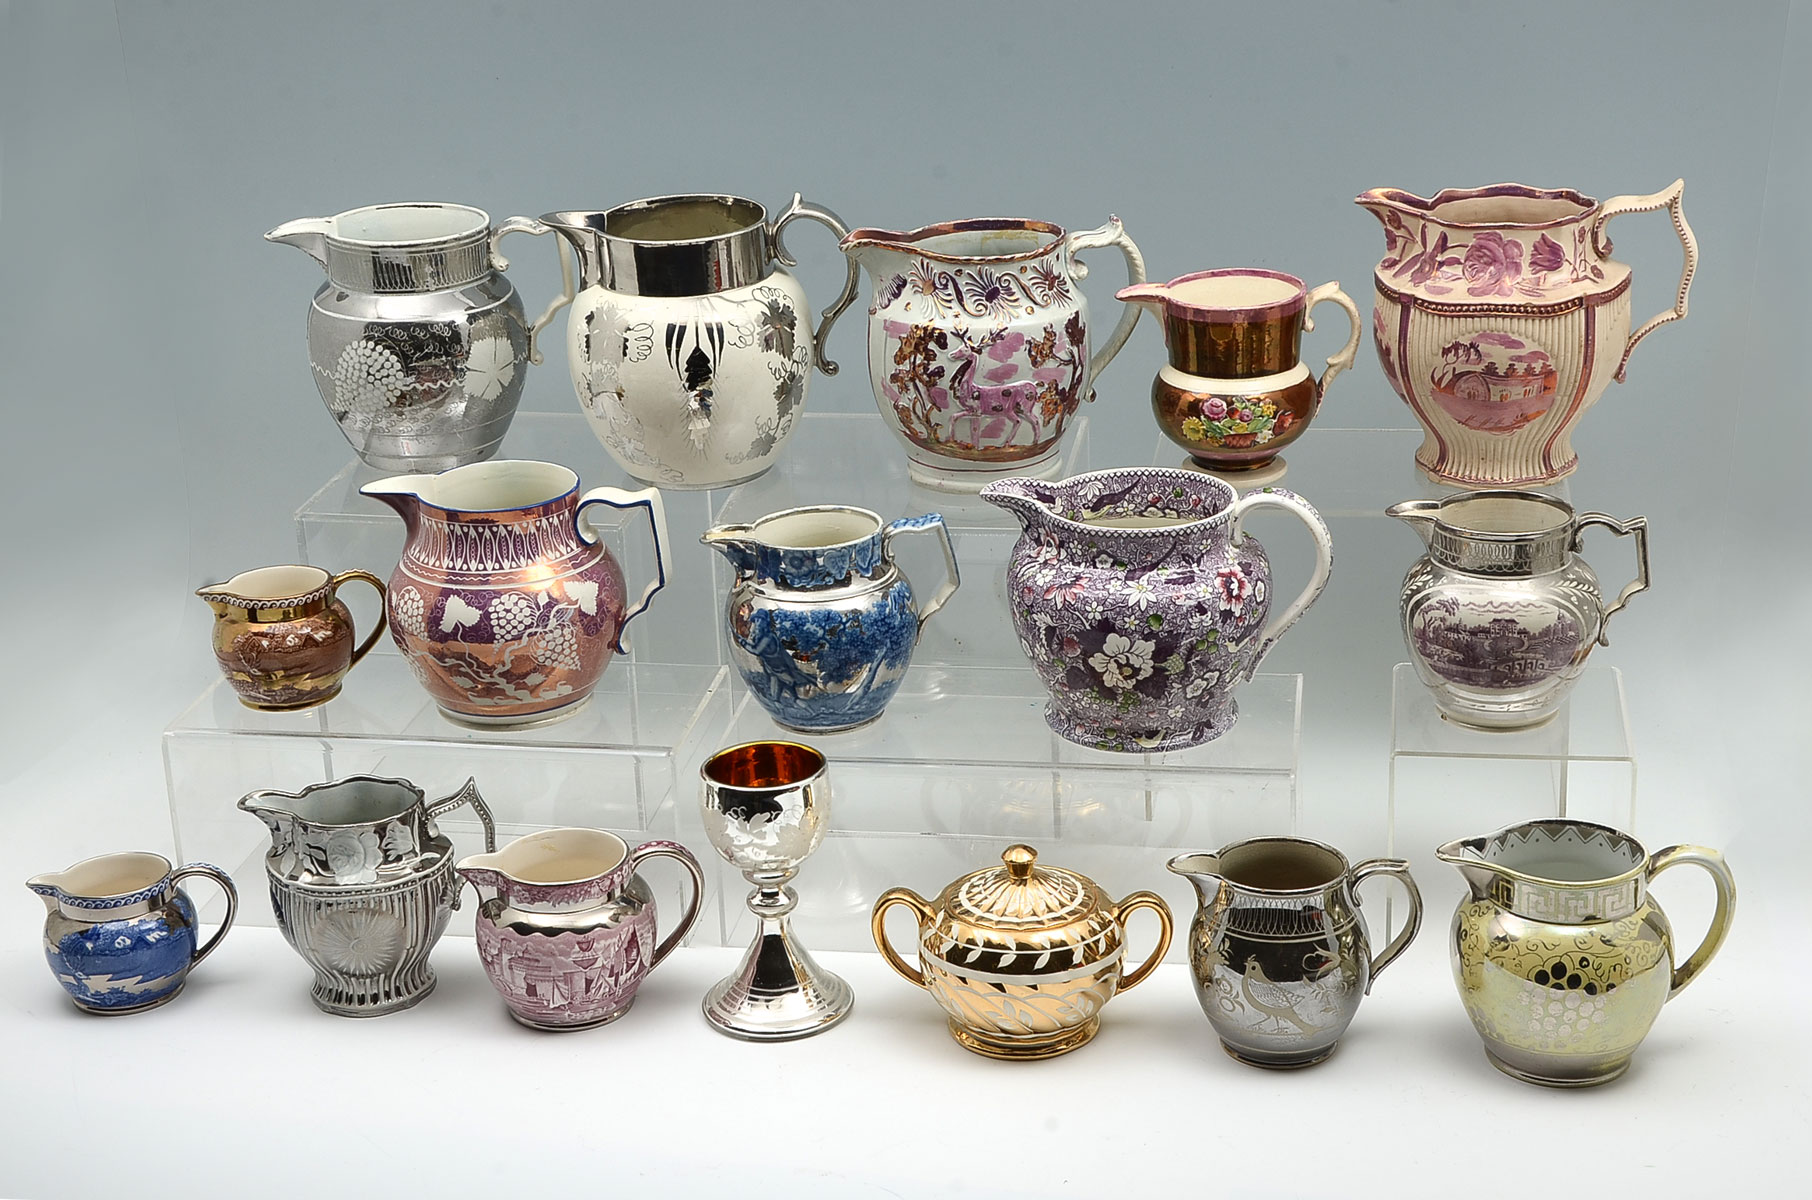 17 PIECE LUSTERWARE COLLECTION: Comprising;